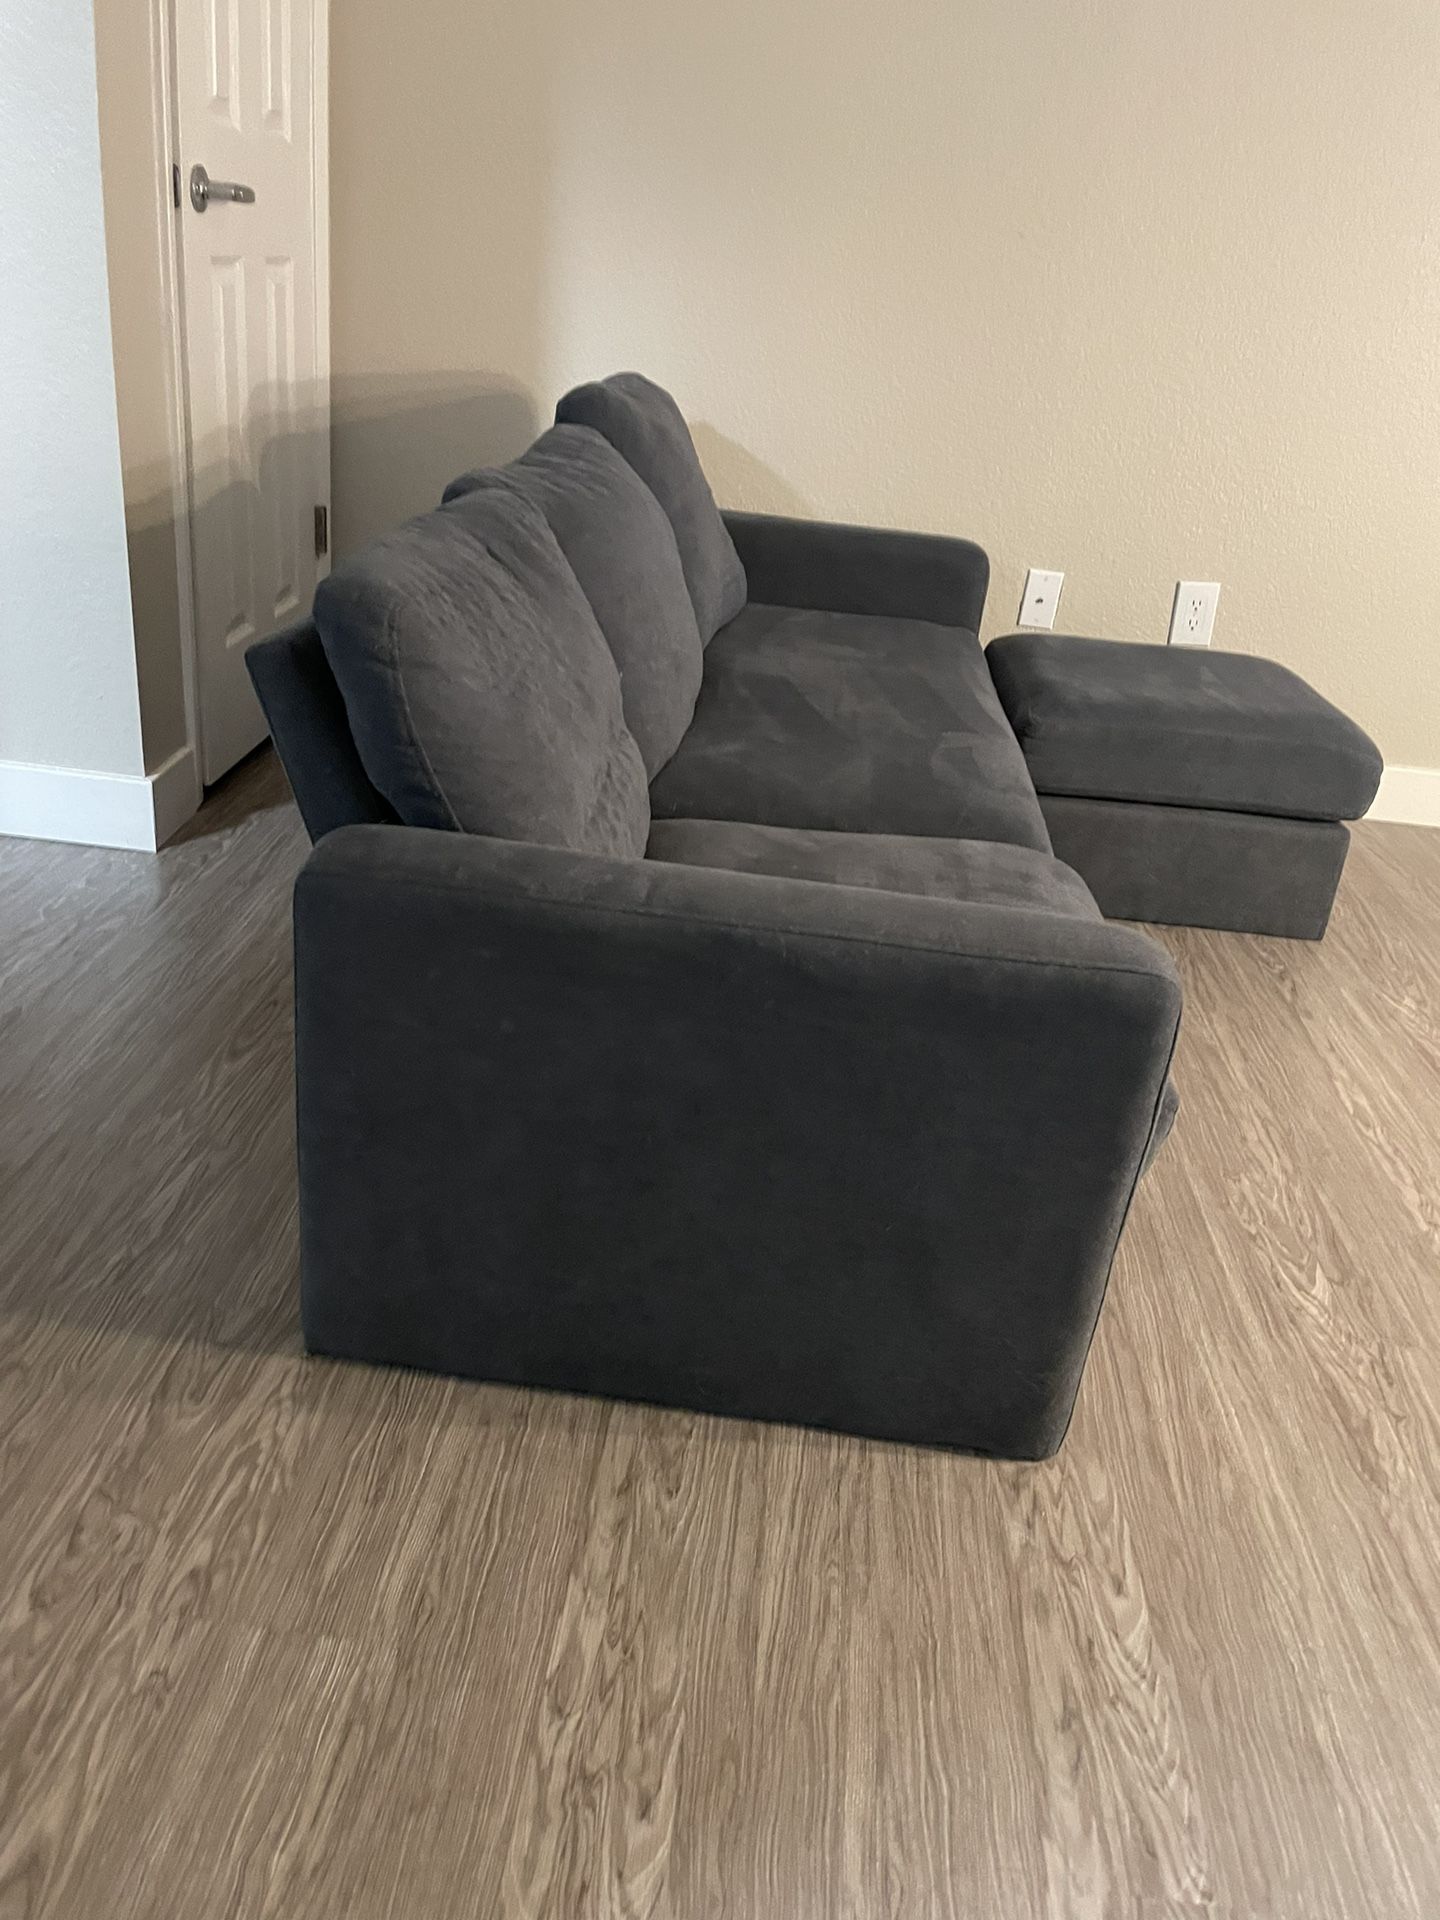 Couch From Amazon  (Pick Up Only)